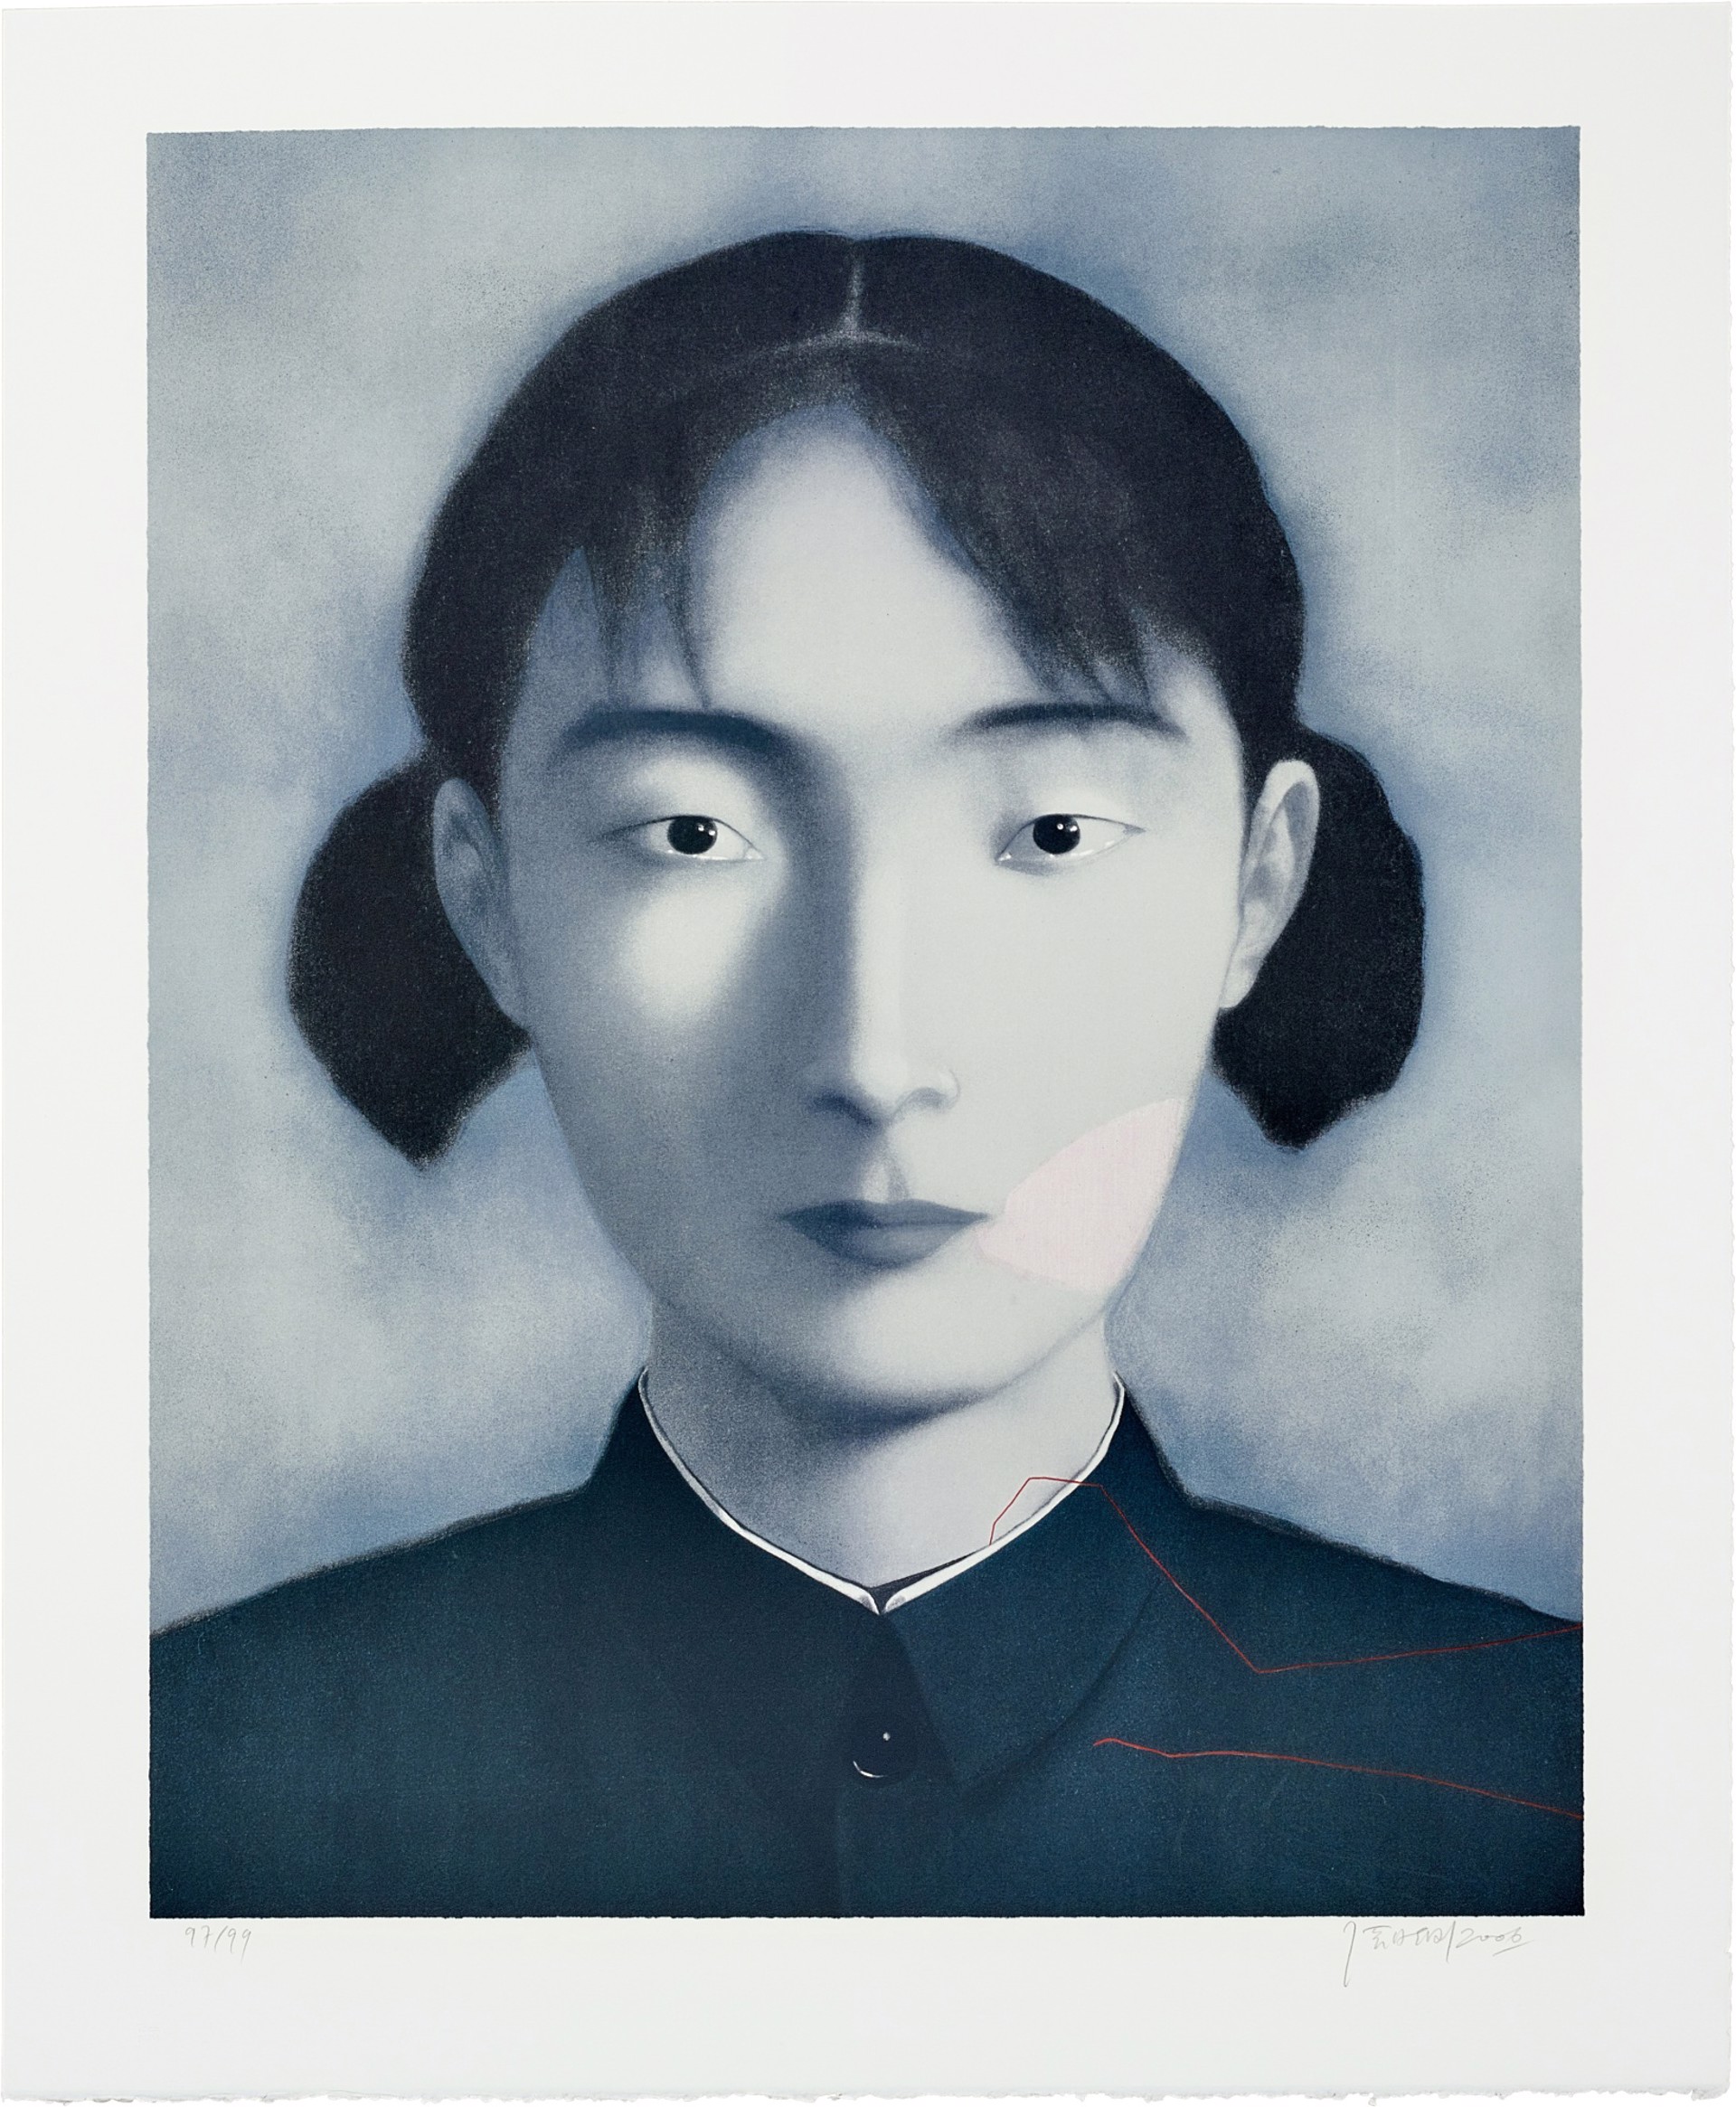 Untitled, from Bloodline Series by Zhang Xiaogang